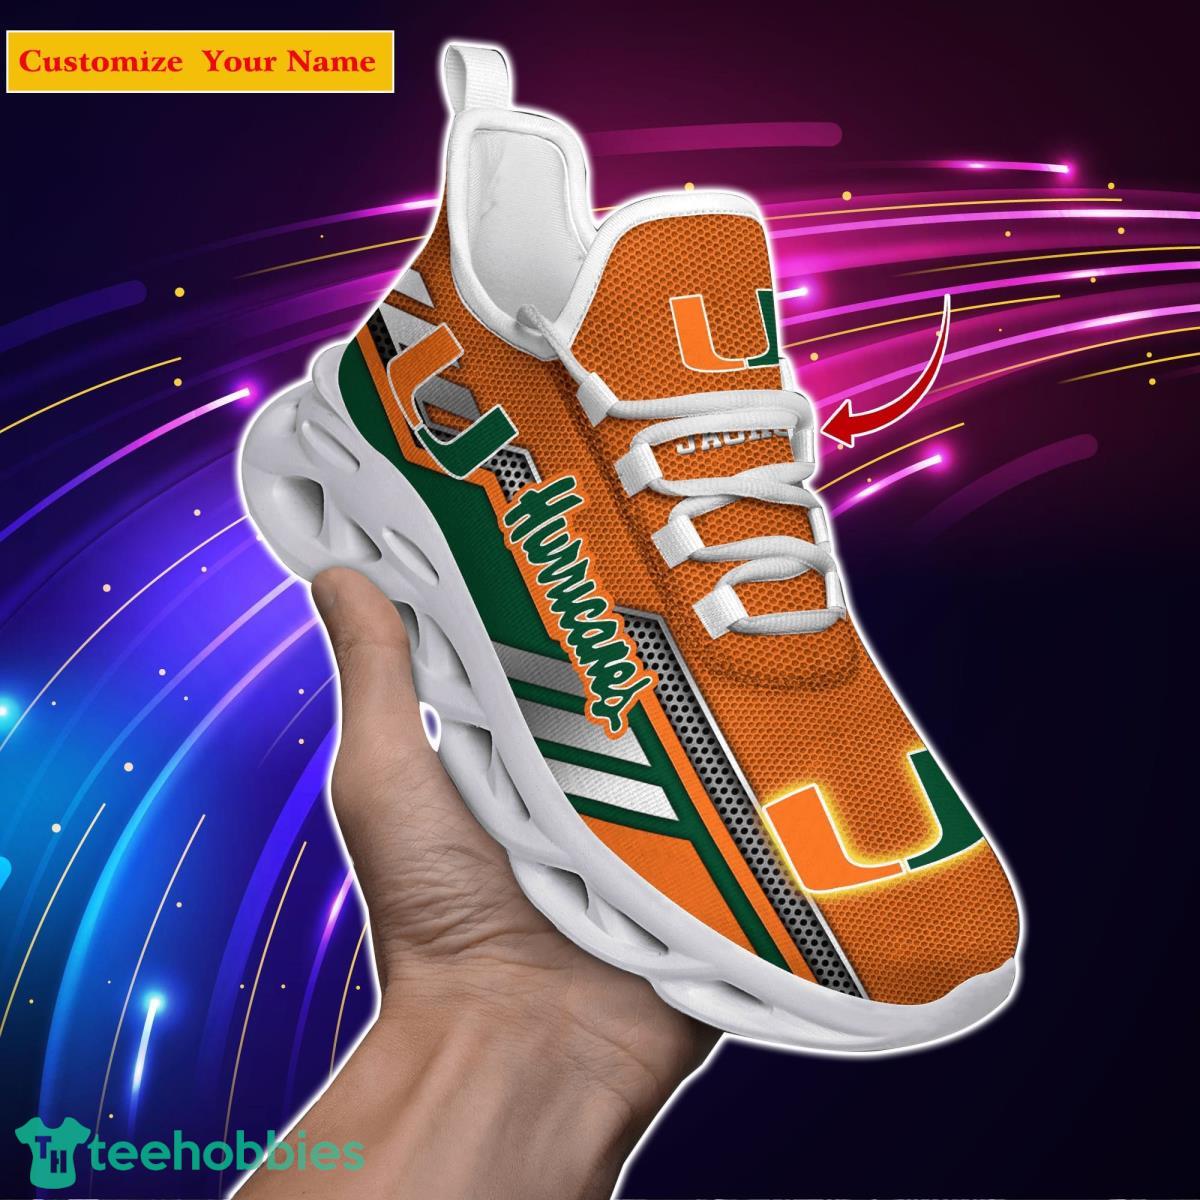 Miami Hurricanes NCAA1 Custom Name Max Soul Shoes Bet Gift For Men Women Fans Product Photo 1